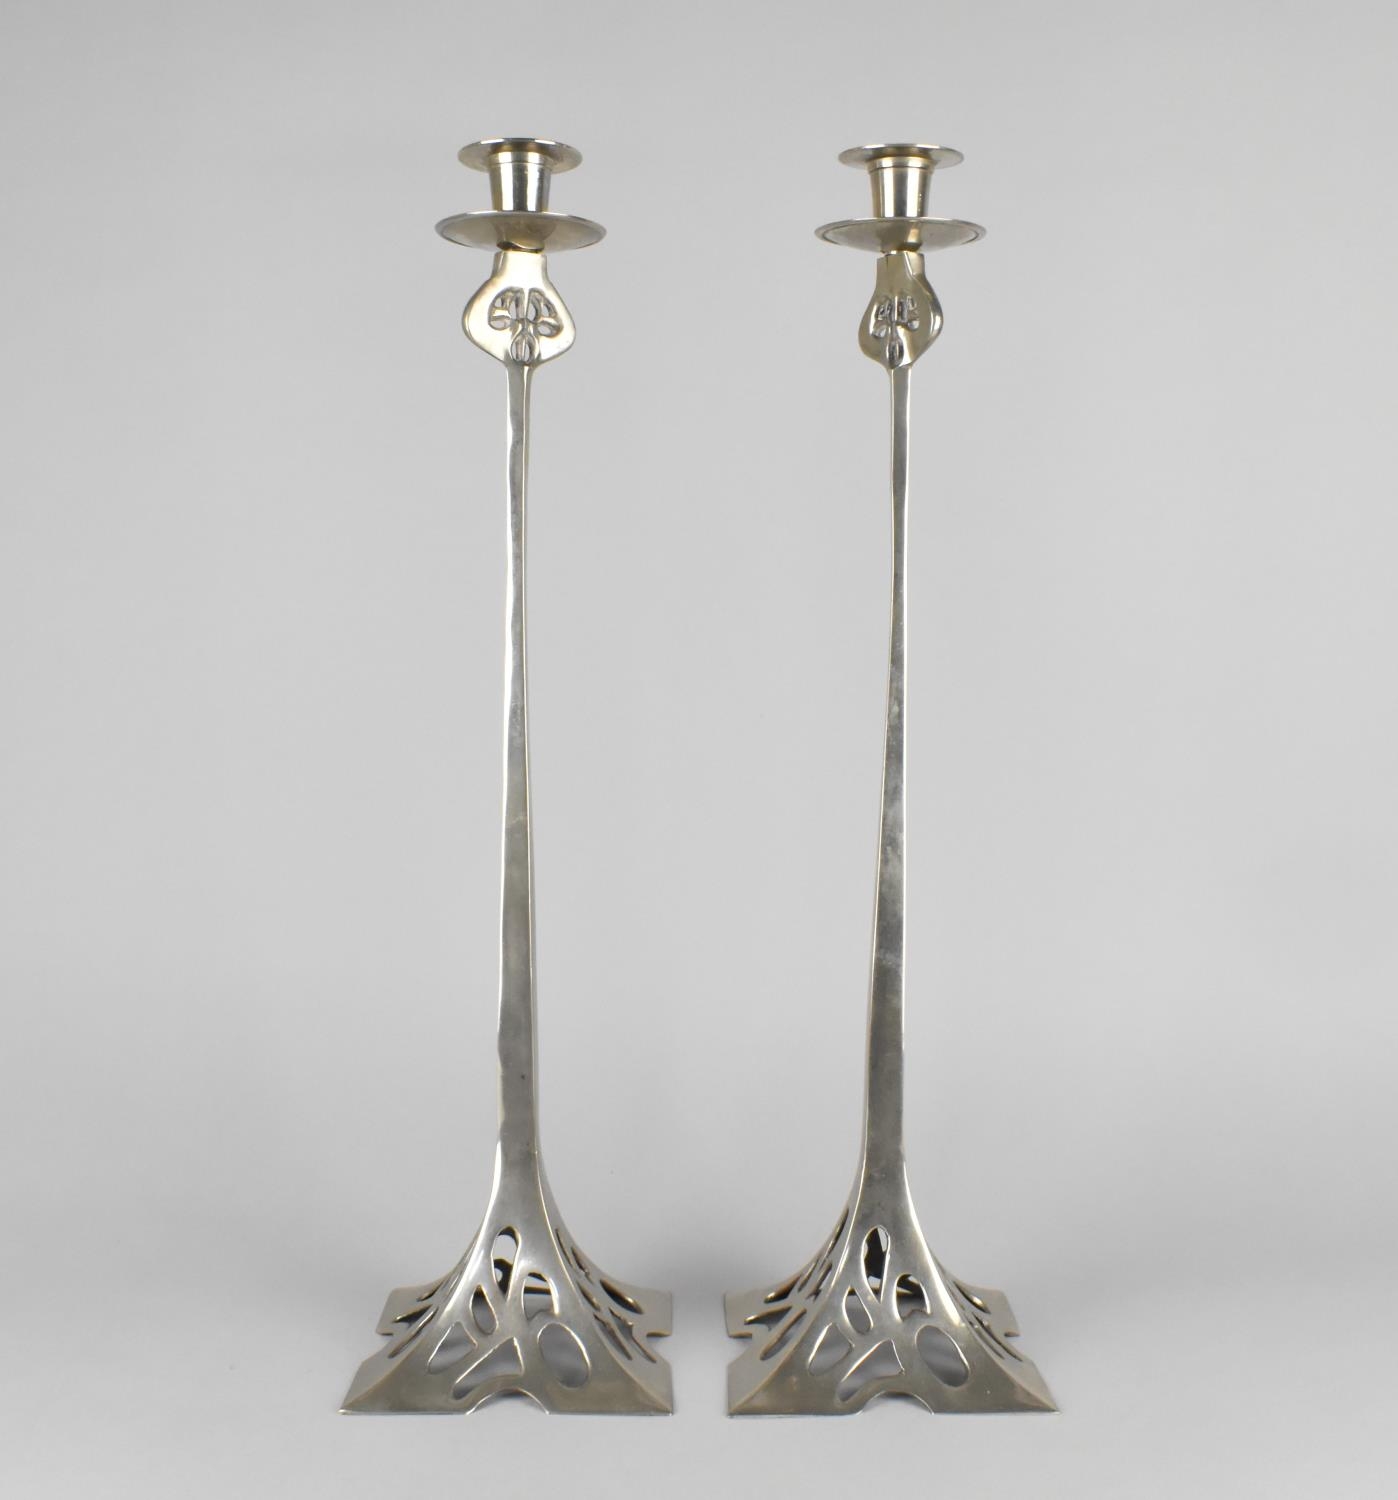 A Pair of Arts and Crafts Style Silver Plated Candlesticks with Flared Square Pierced Bases having